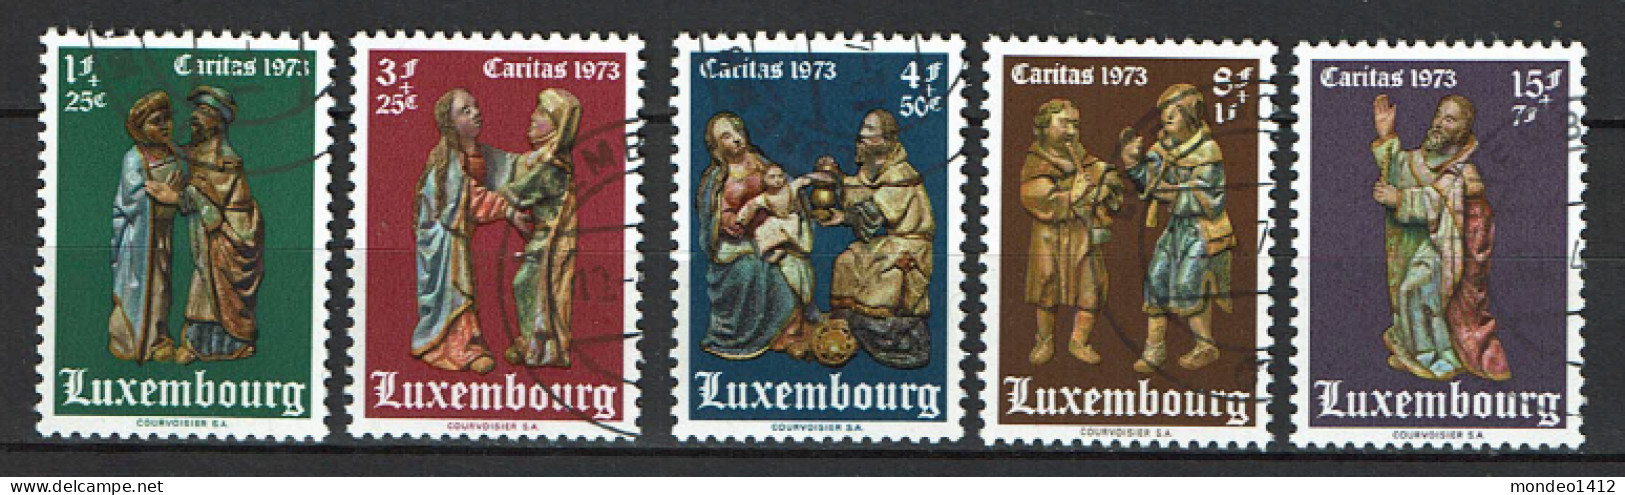 Luxembourg 1973 - YT 821/825 - Religious Statuettes - Charity Issue - Oblitérés